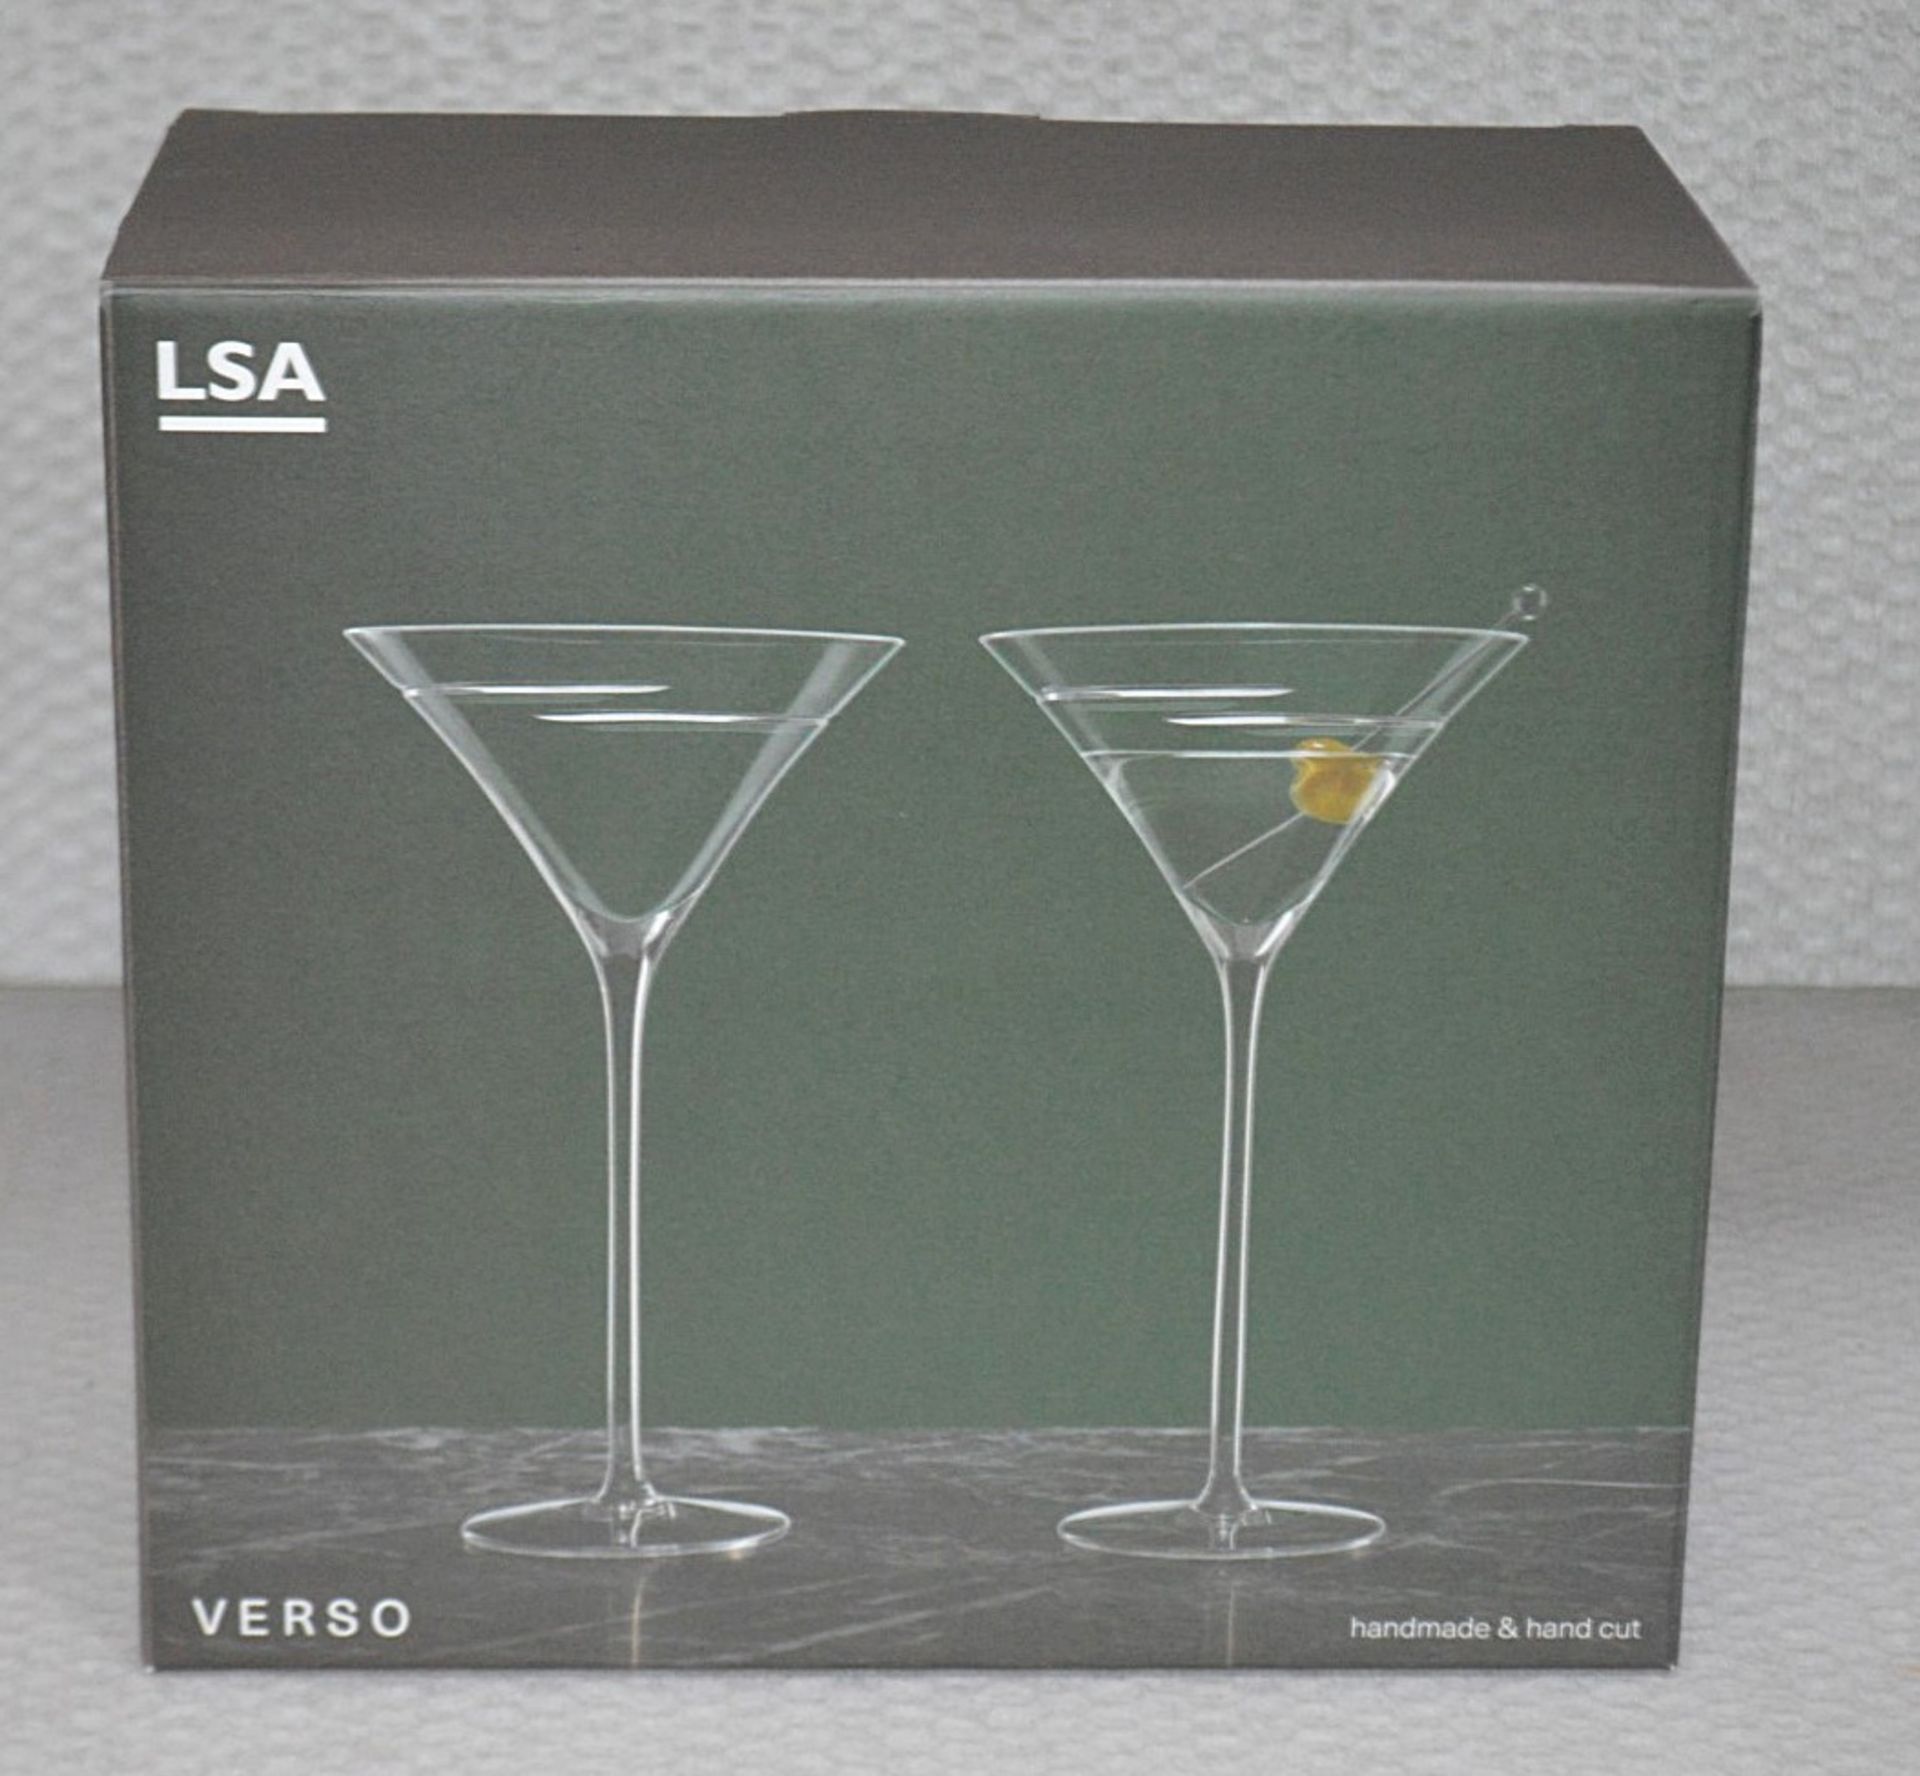 1 x LSA INTERNATIONAL Verso Cocktail Glass (275ml) - Unused Boxed Stock - Image 4 of 4